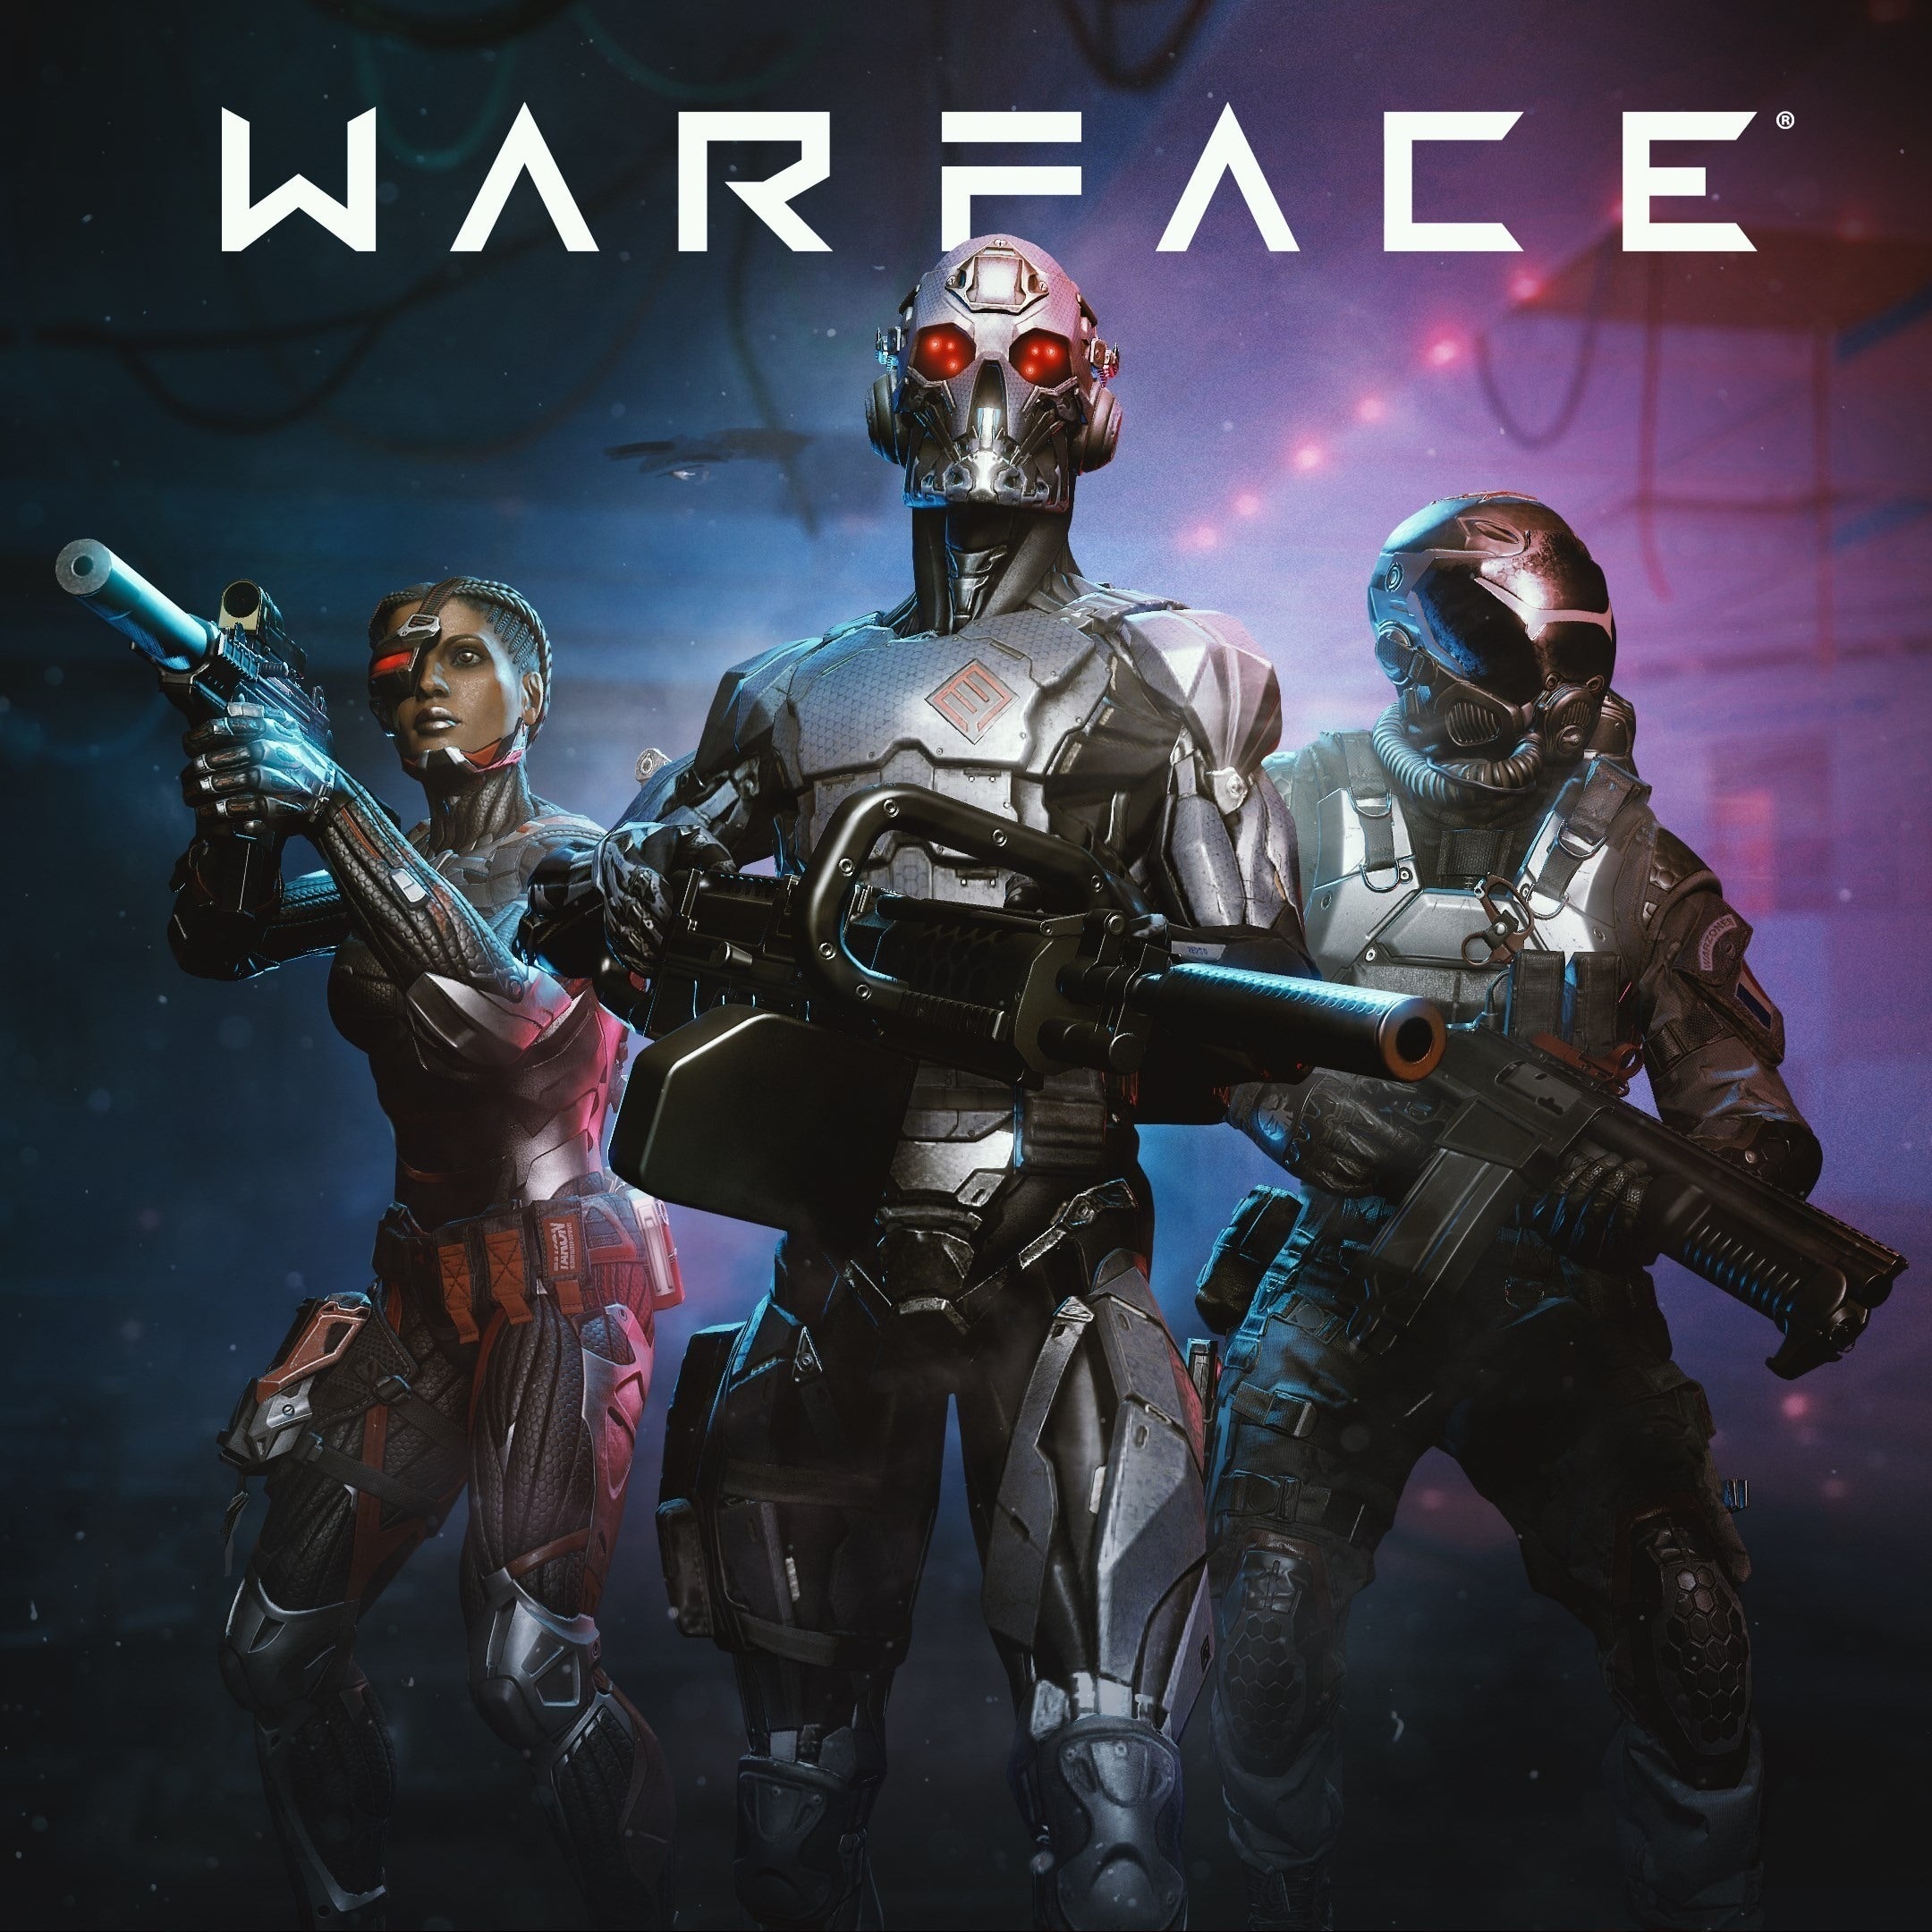 Warface Game Poster 2020 Wallpapers